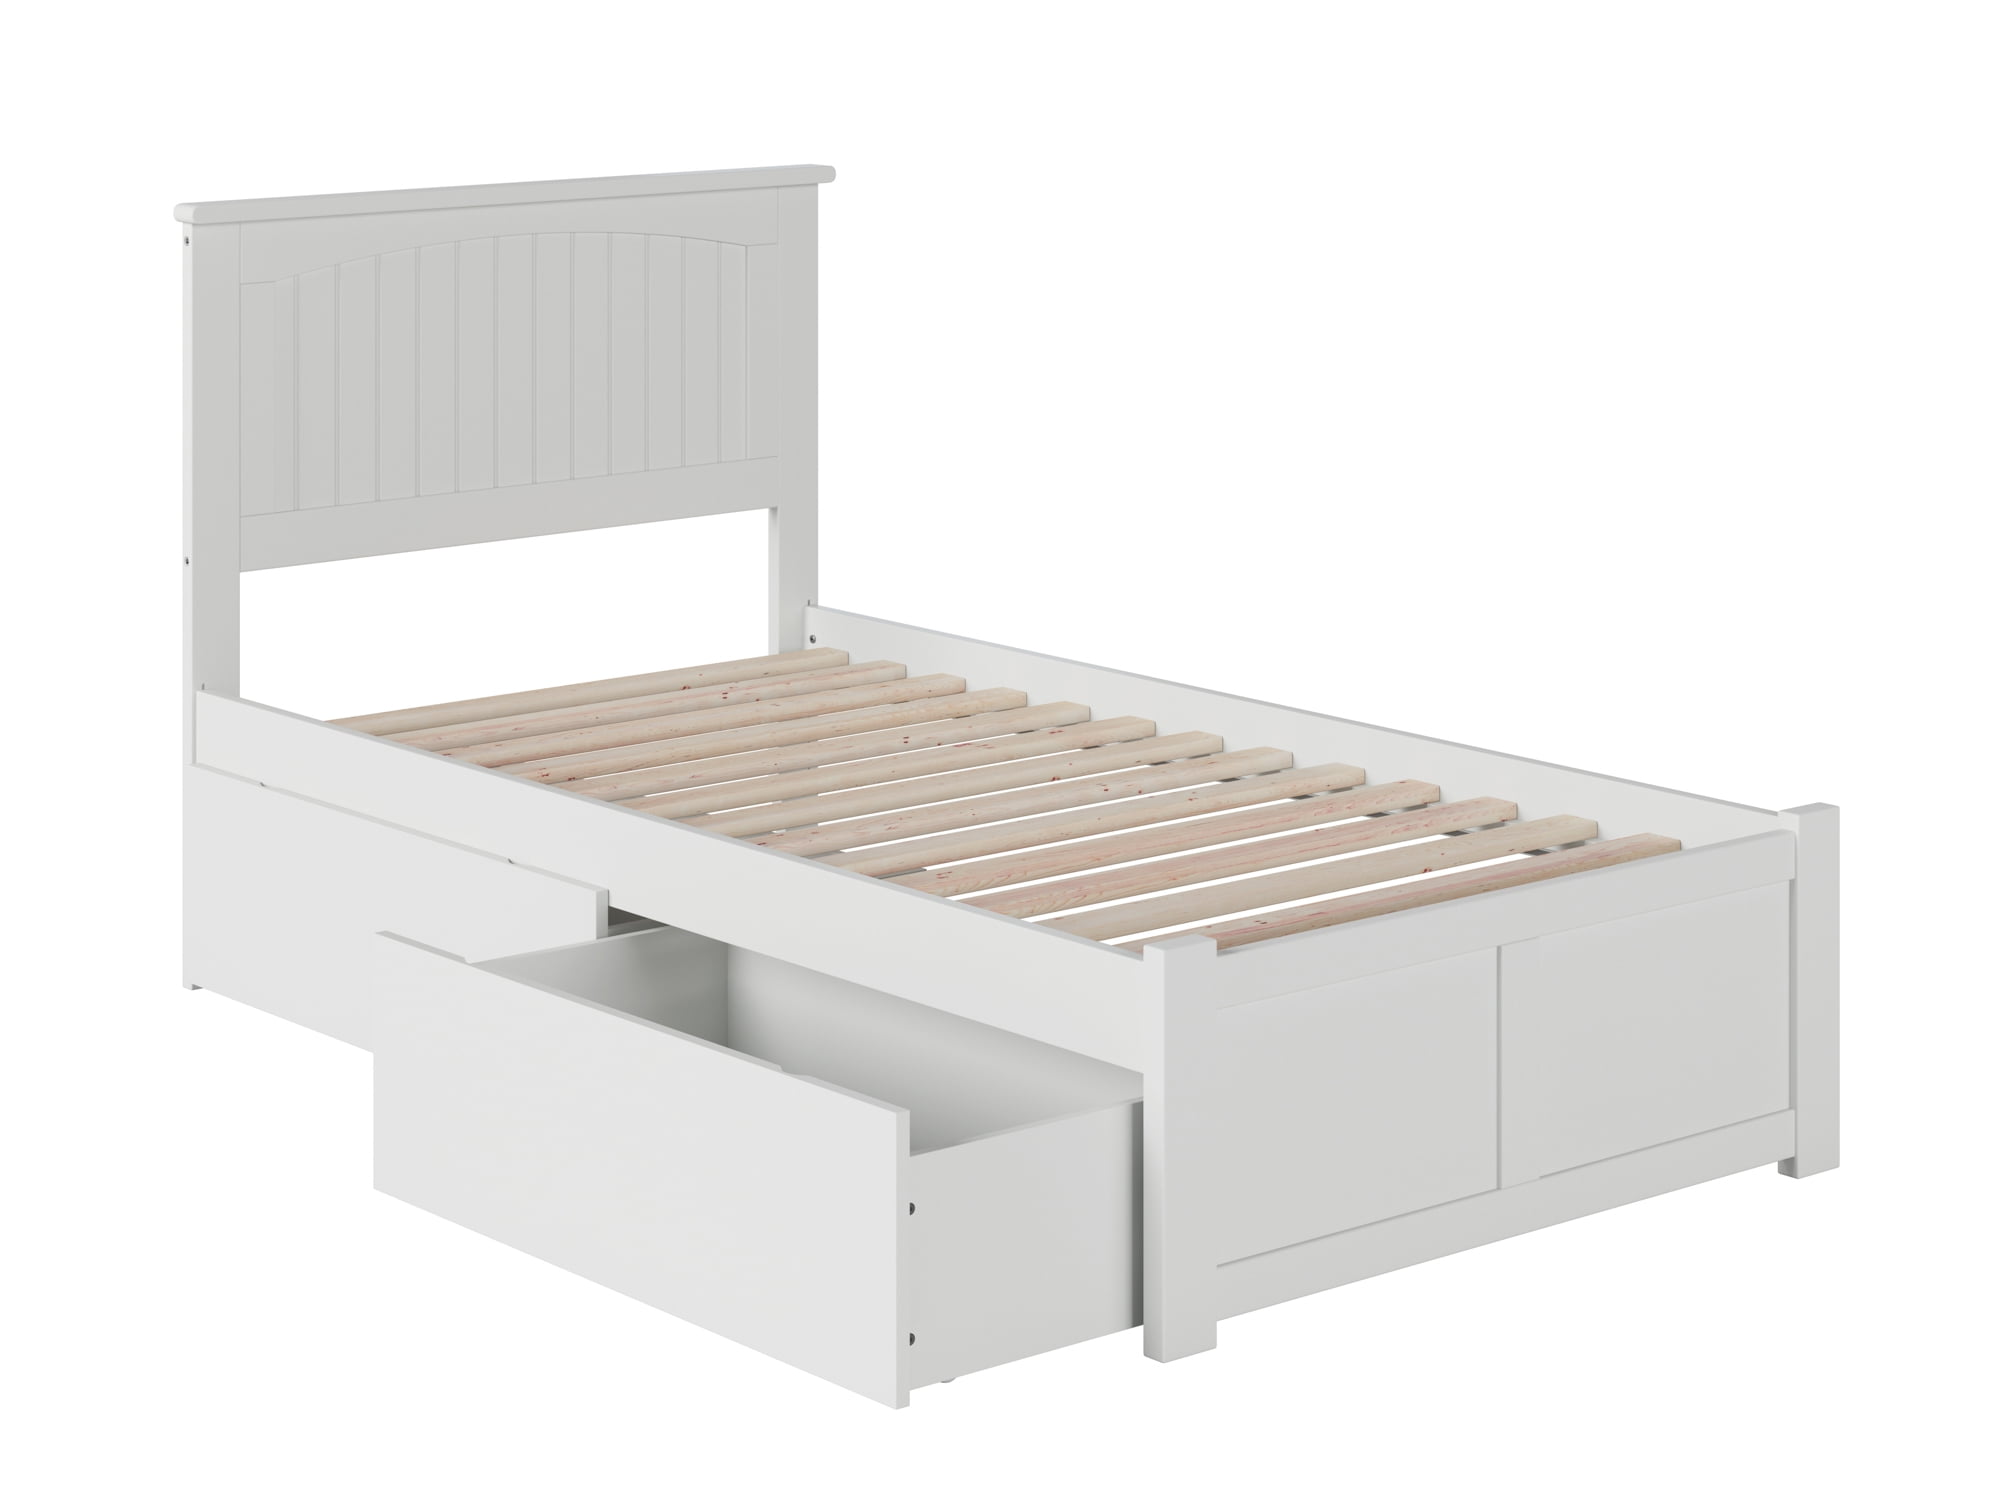 Ar8212112 Nantucket Panel Footboard & Urban Bed Drawers, White - Twin Extra Large